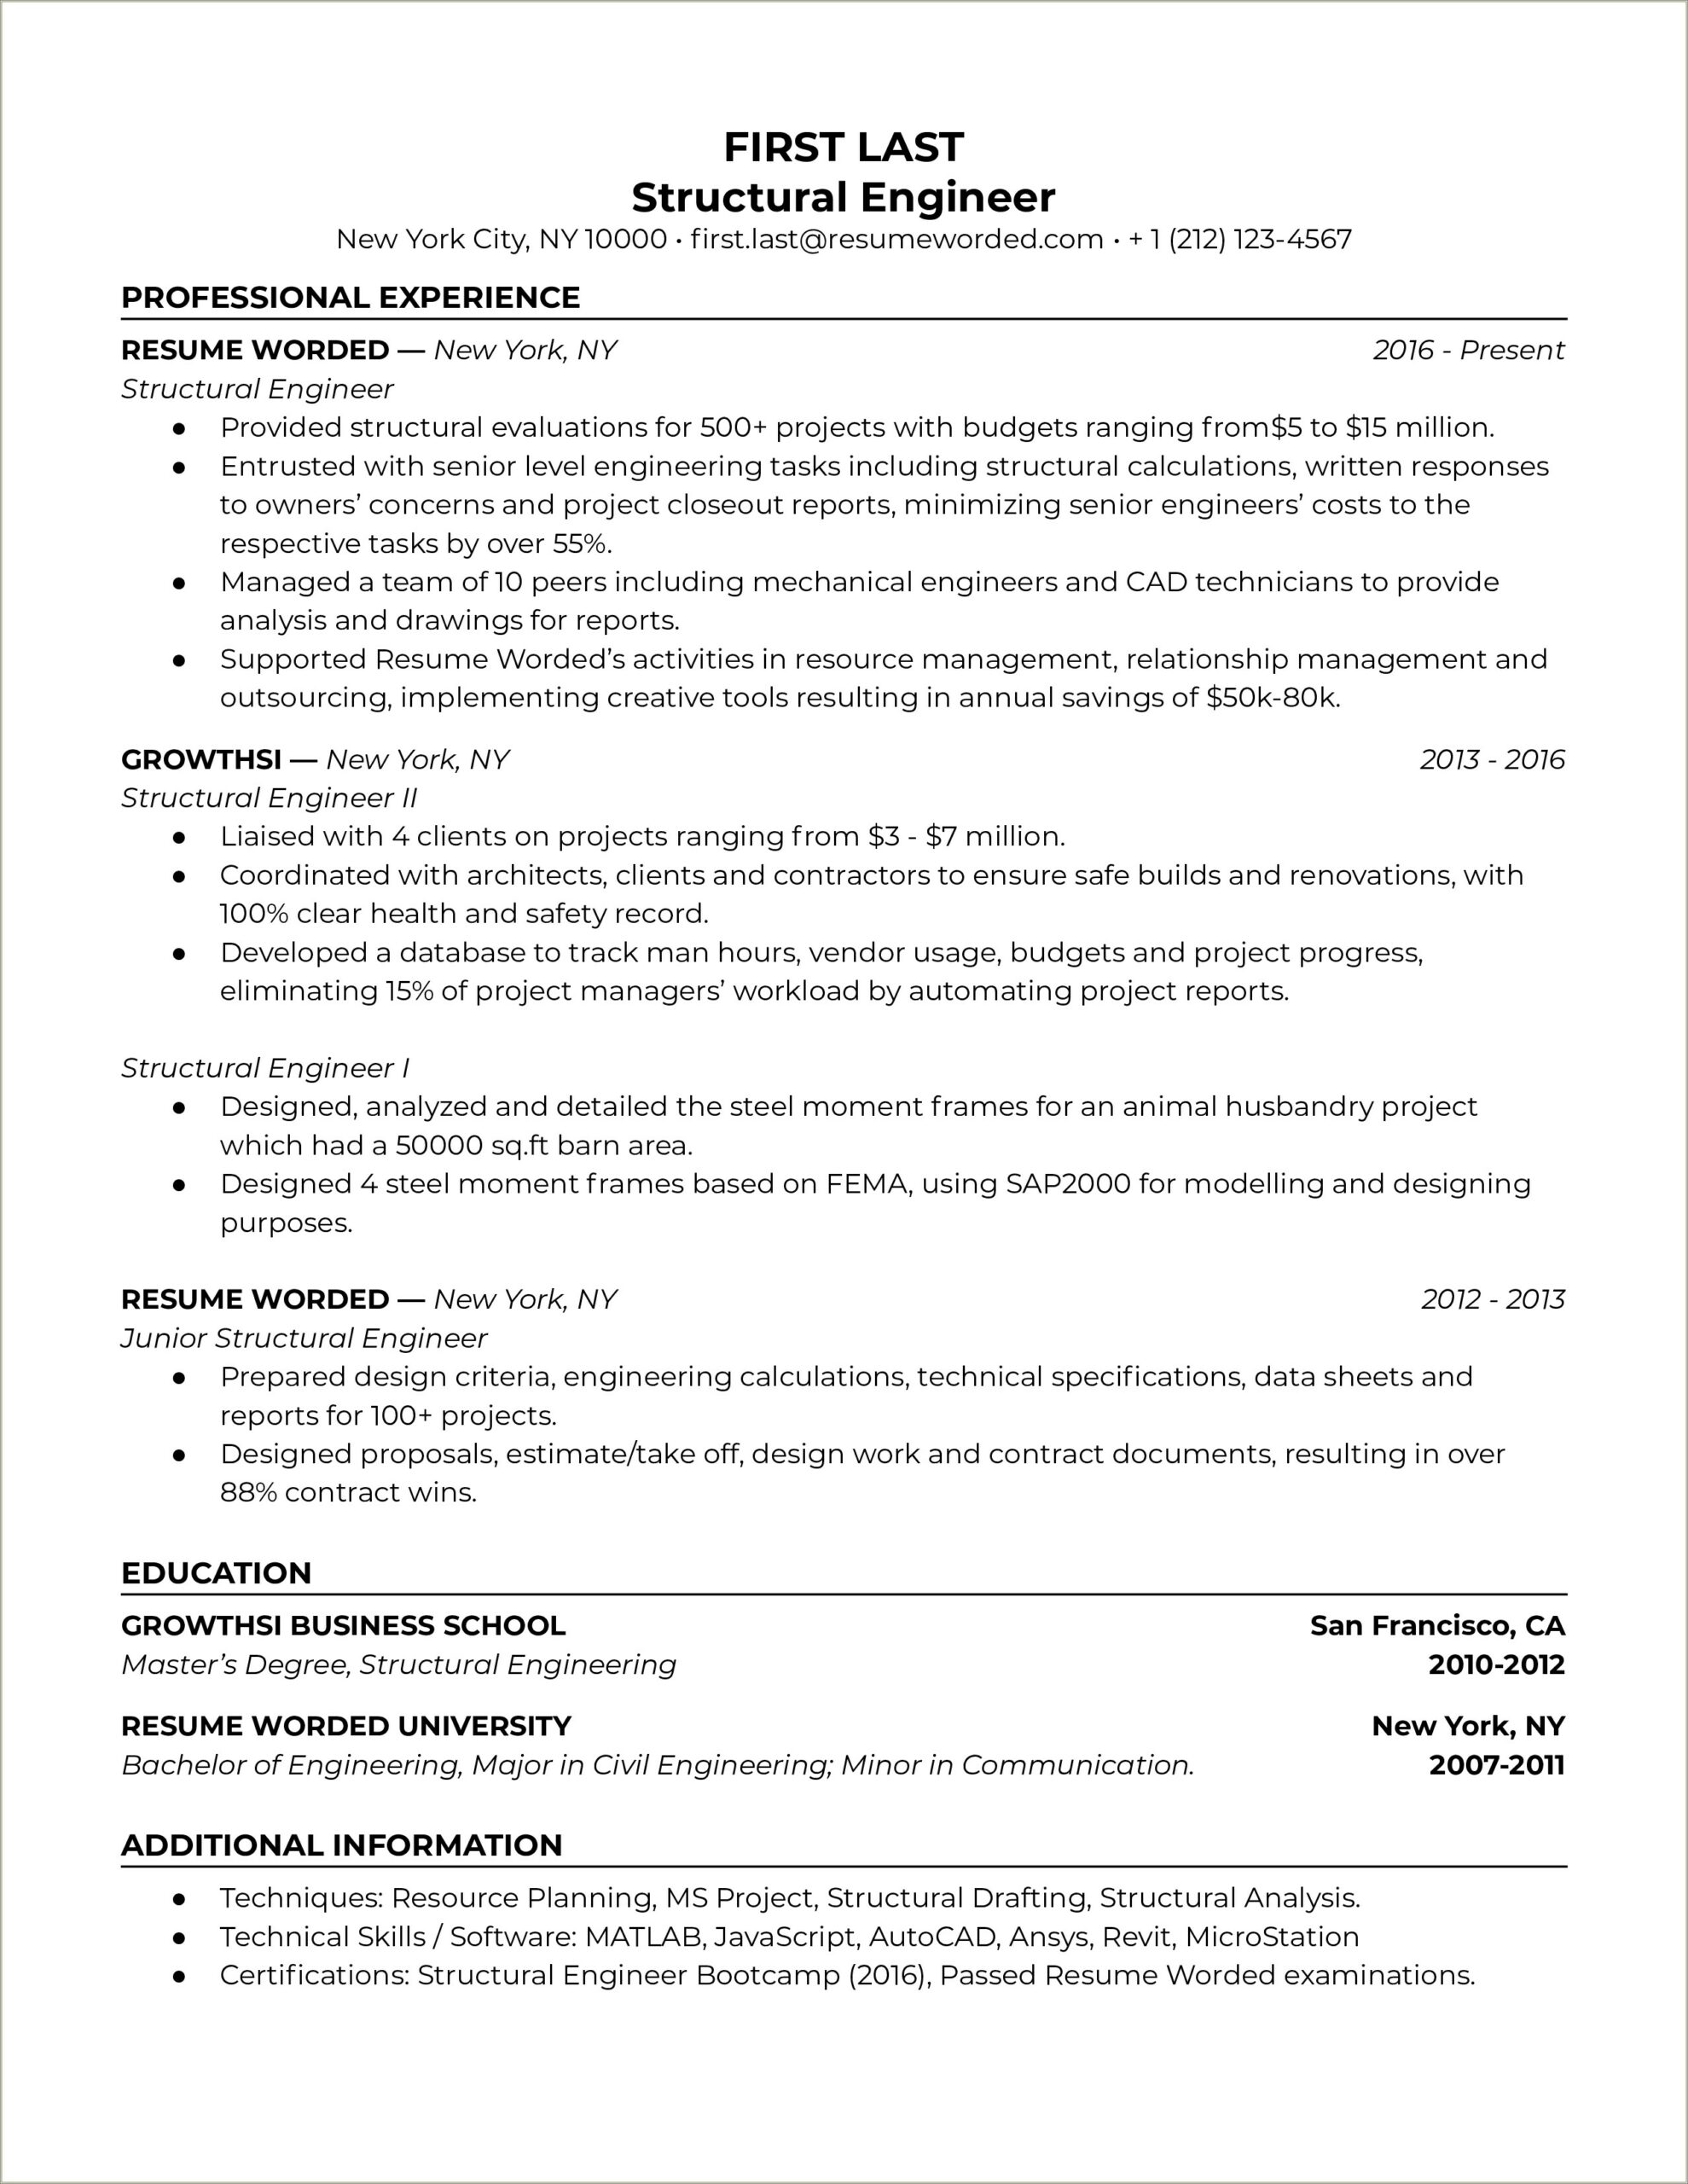 List Of Technical Skills For An Engineering Resume